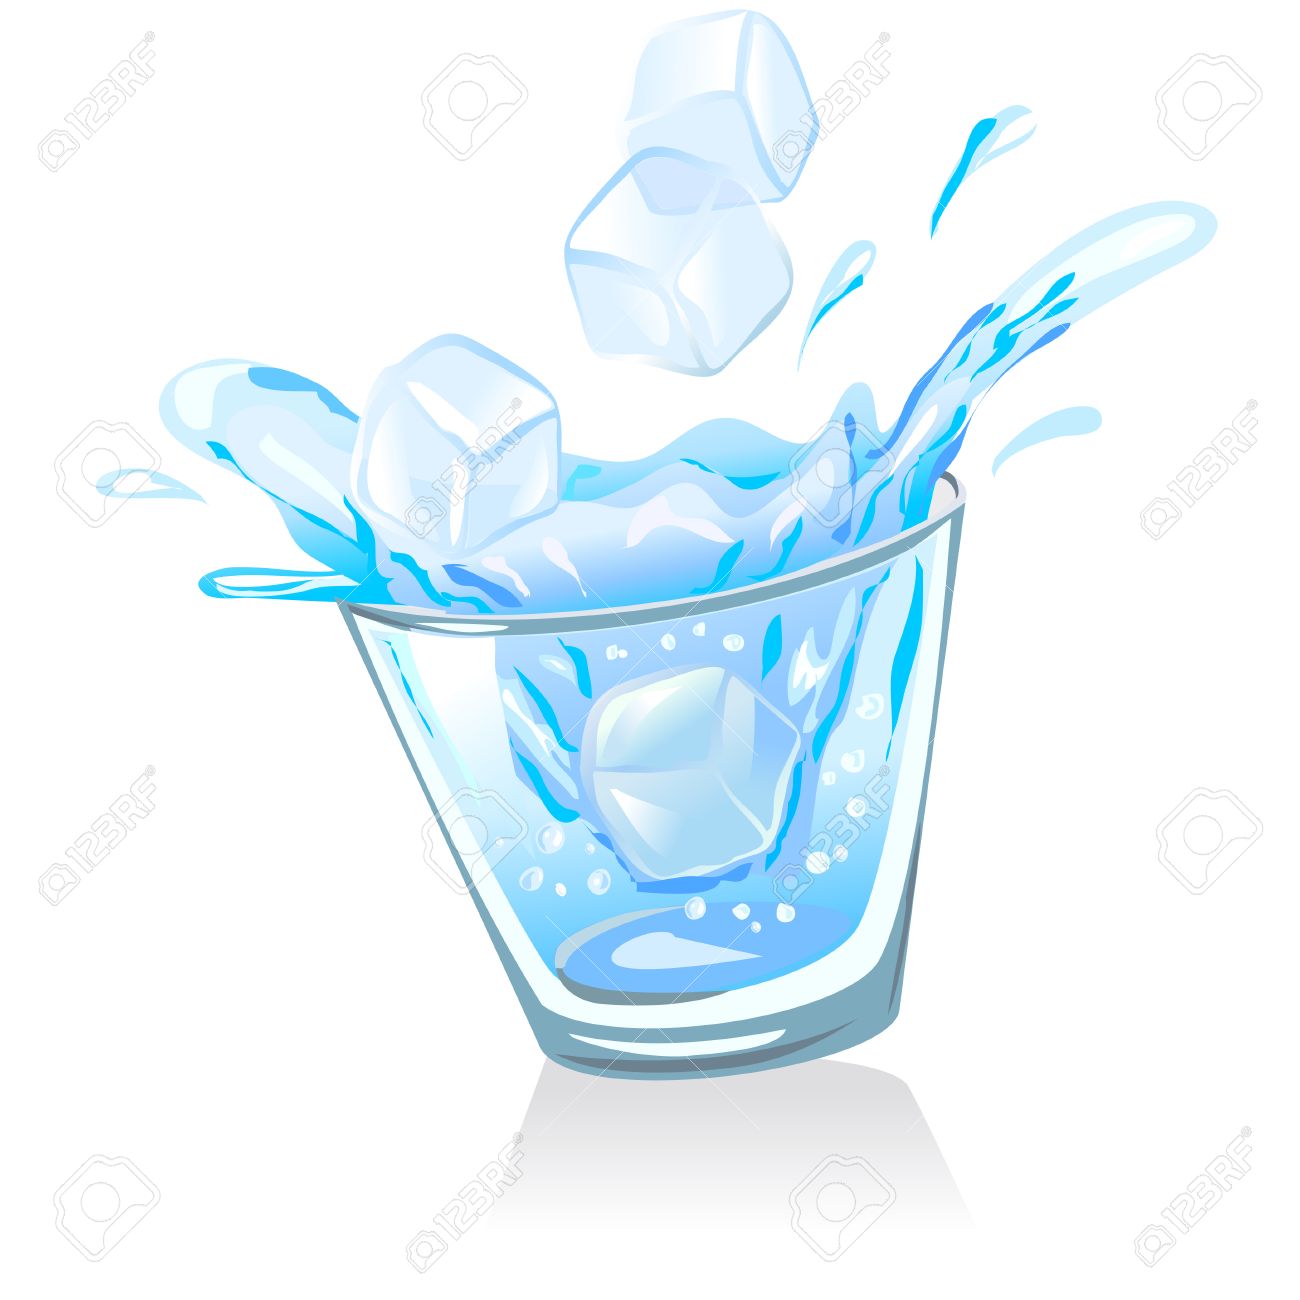 glass with water and ice cubes. vector illustration.